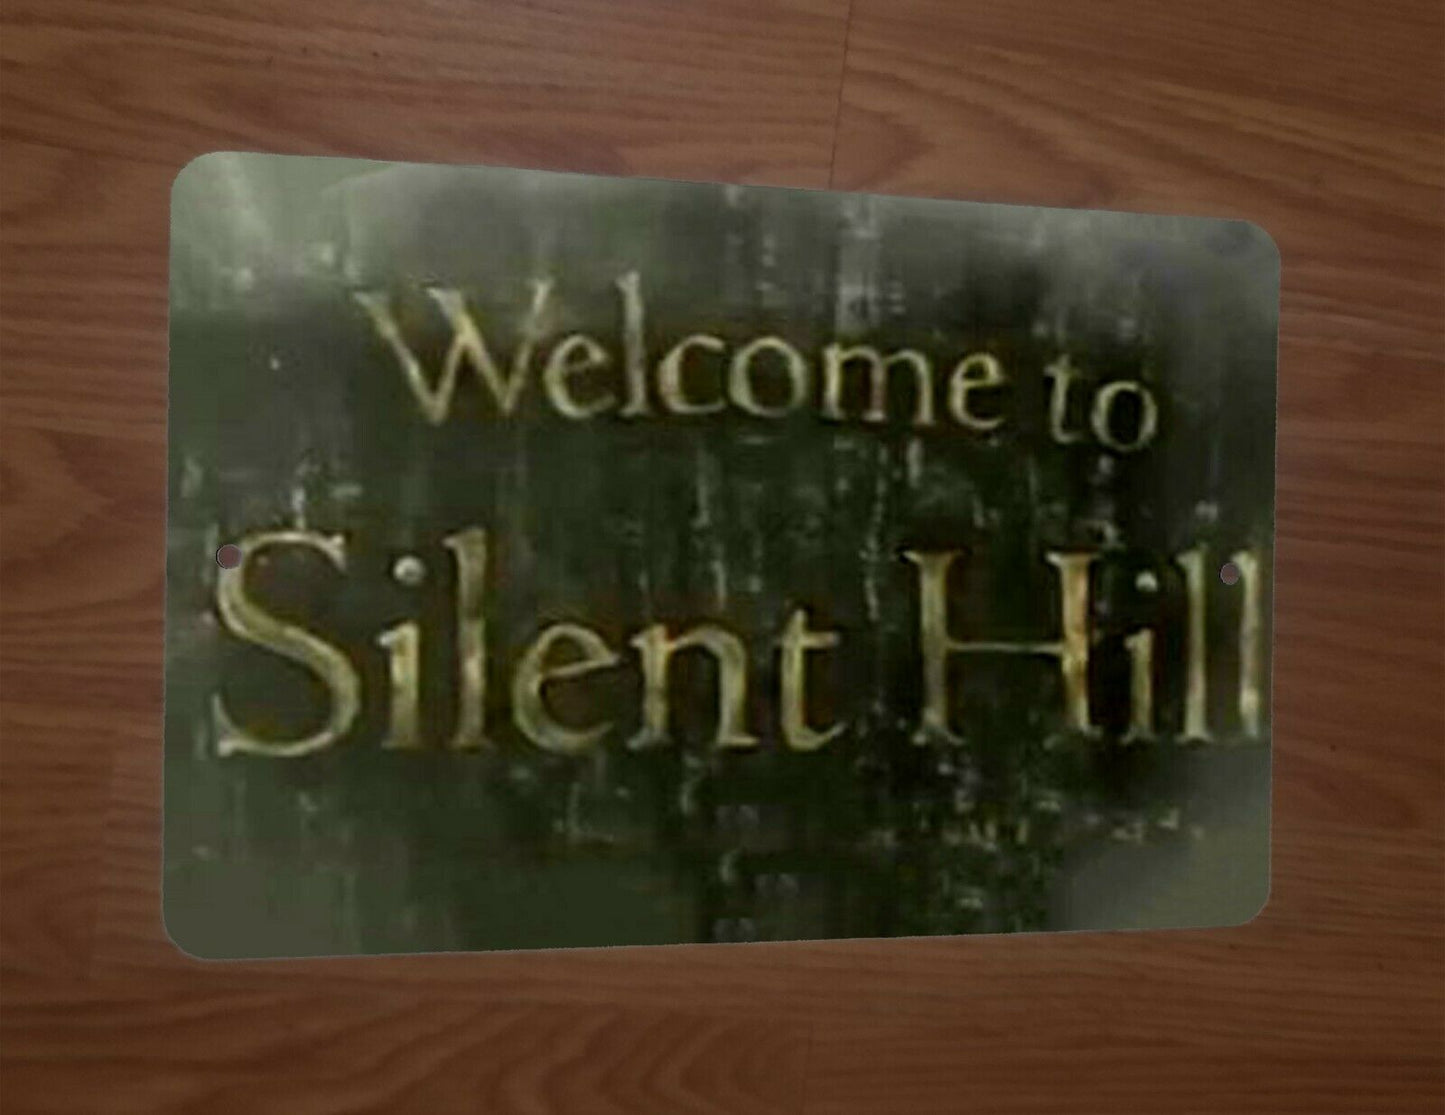 Welcome to Silent Hill 8x12 Metal Wall Movie Poster Sign